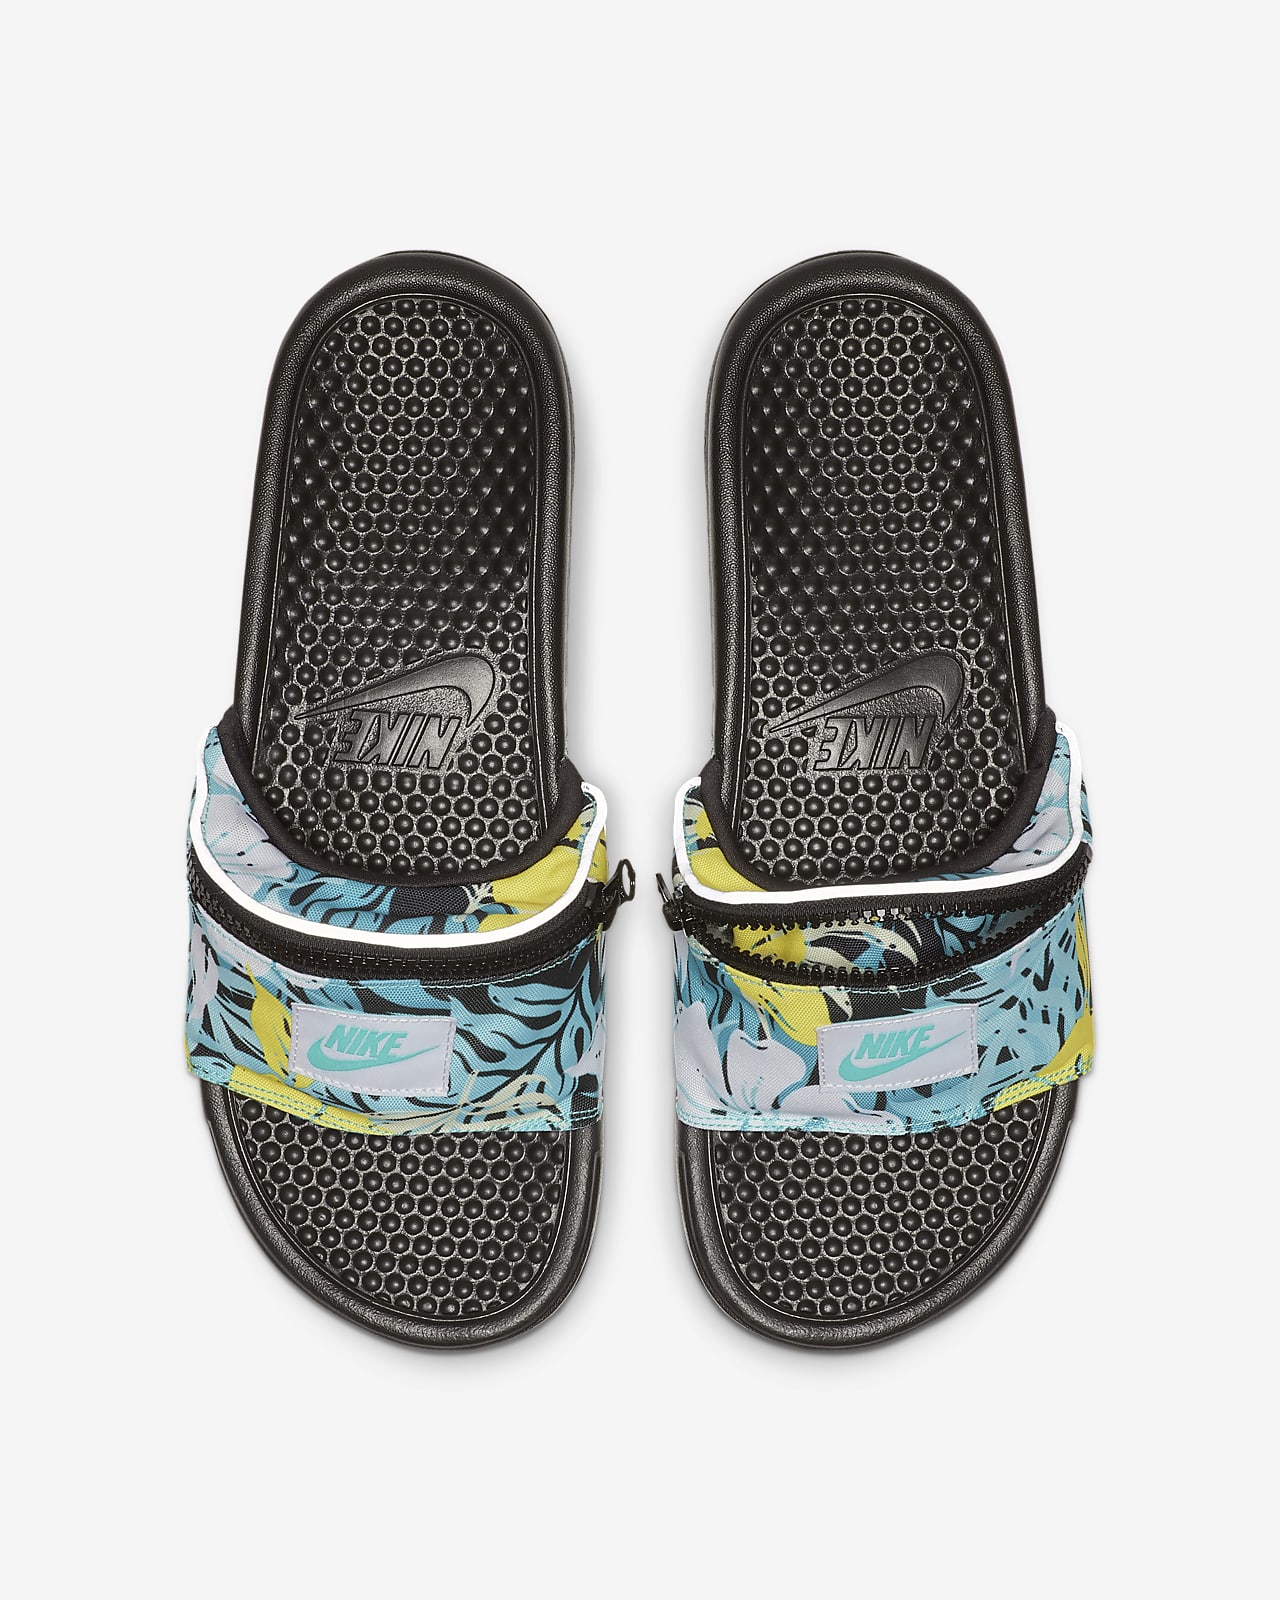 nike slides with zipper pouch